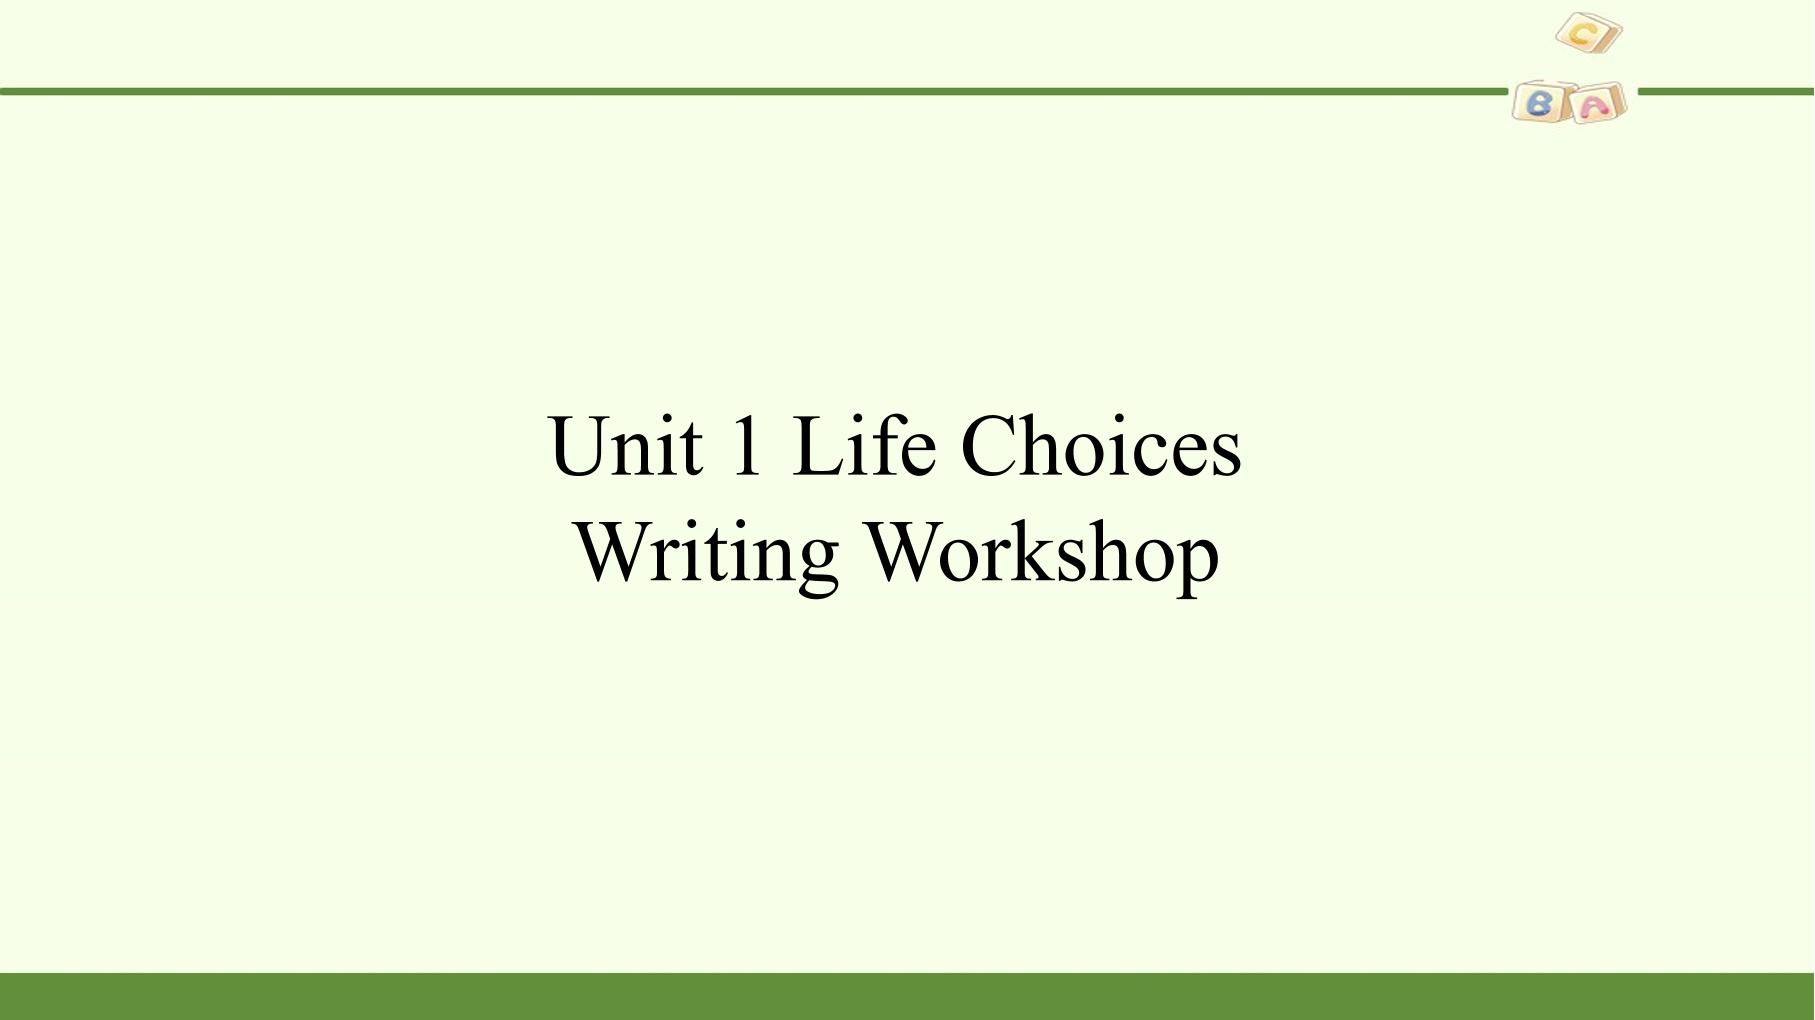 Writing Workshop—A Personal Email